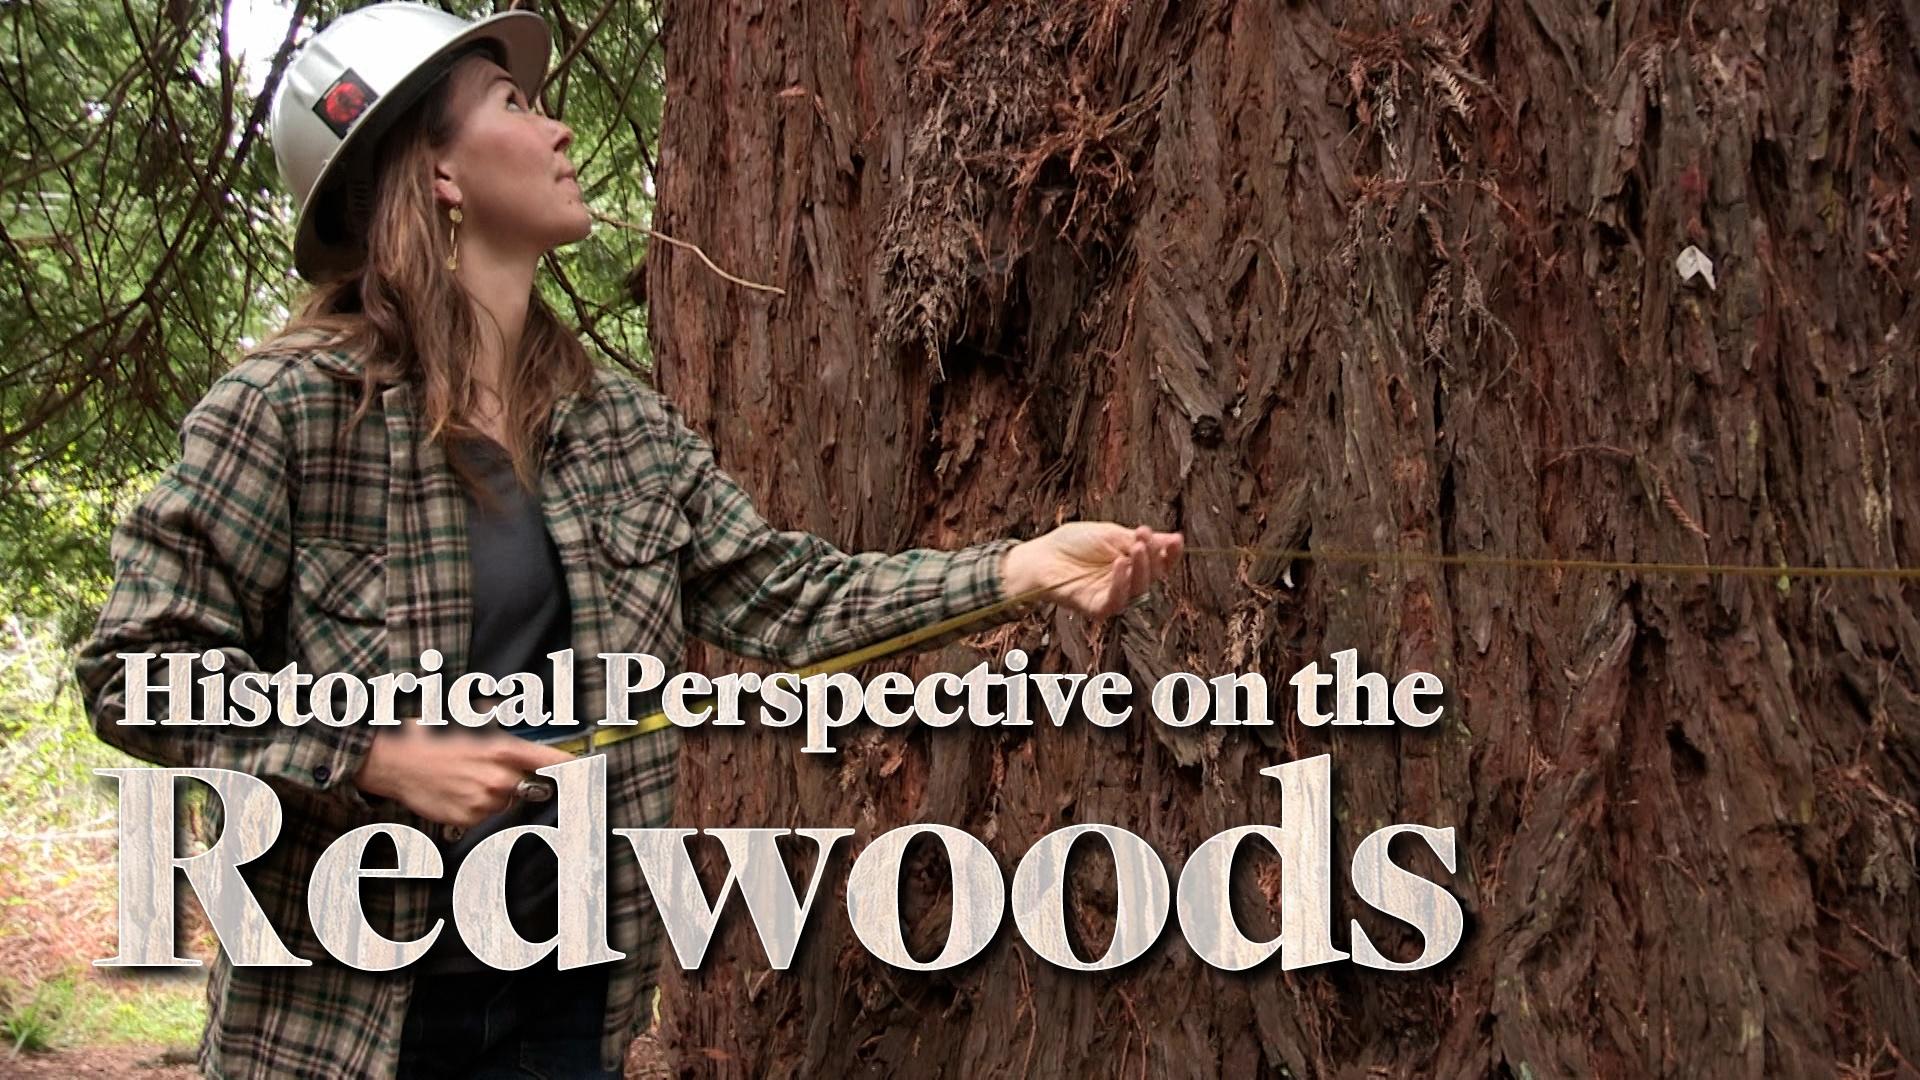 image: a woman measuring around a redwood base. shes wearing a hat and a plaid shirt. text: historical perspective on the redwoods